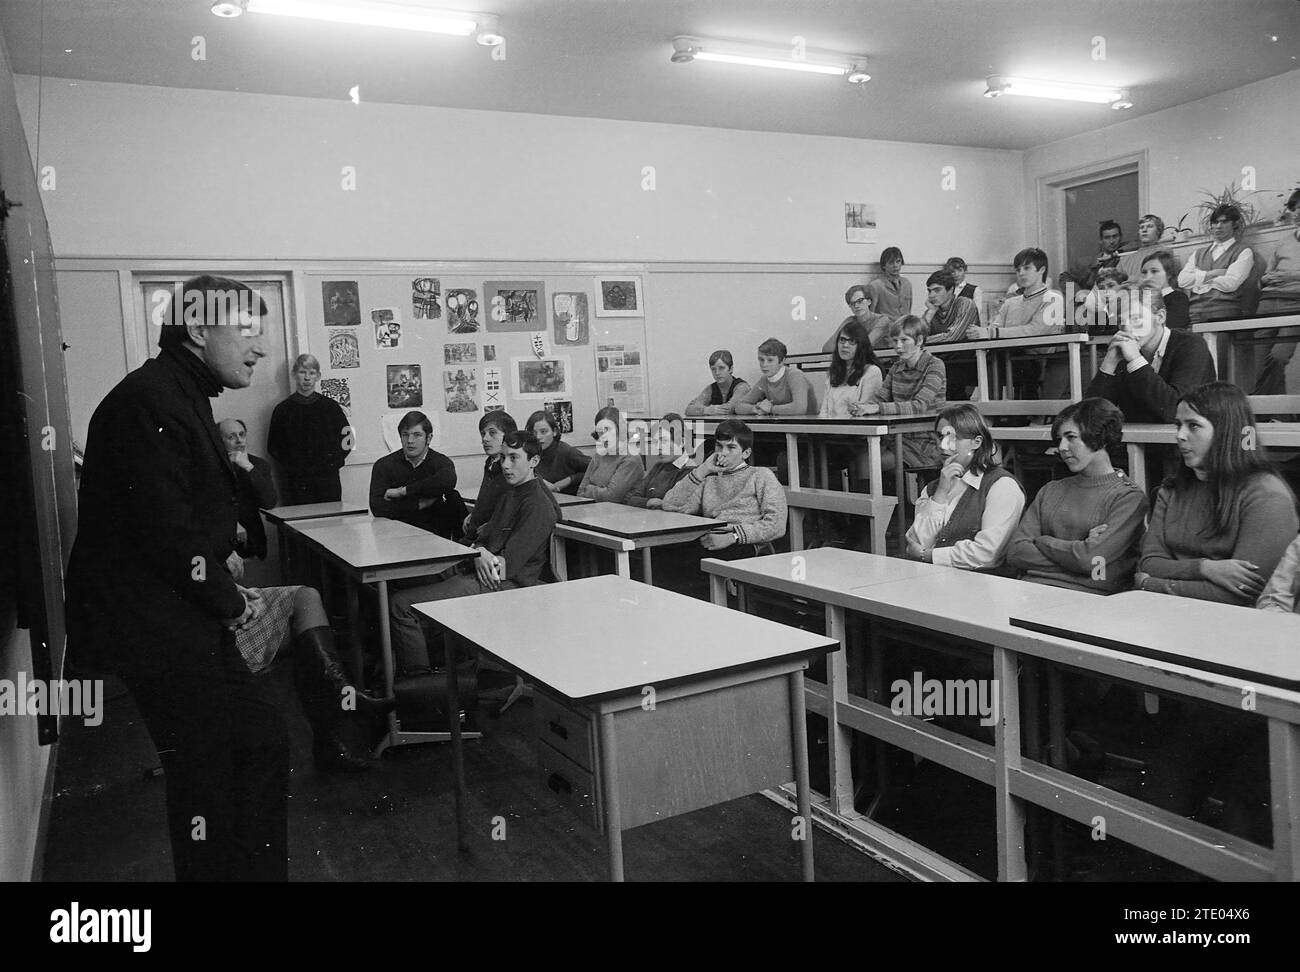 Peter Oosthoek on MULO, People, Schools, 13-12-1968, Whizgle News from the Past, Tailored for the Future. Explore historical narratives, Dutch The Netherlands agency image with a modern perspective, bridging the gap between yesterday's events and tomorrow's insights. A timeless journey shaping the stories that shape our future. Stock Photo